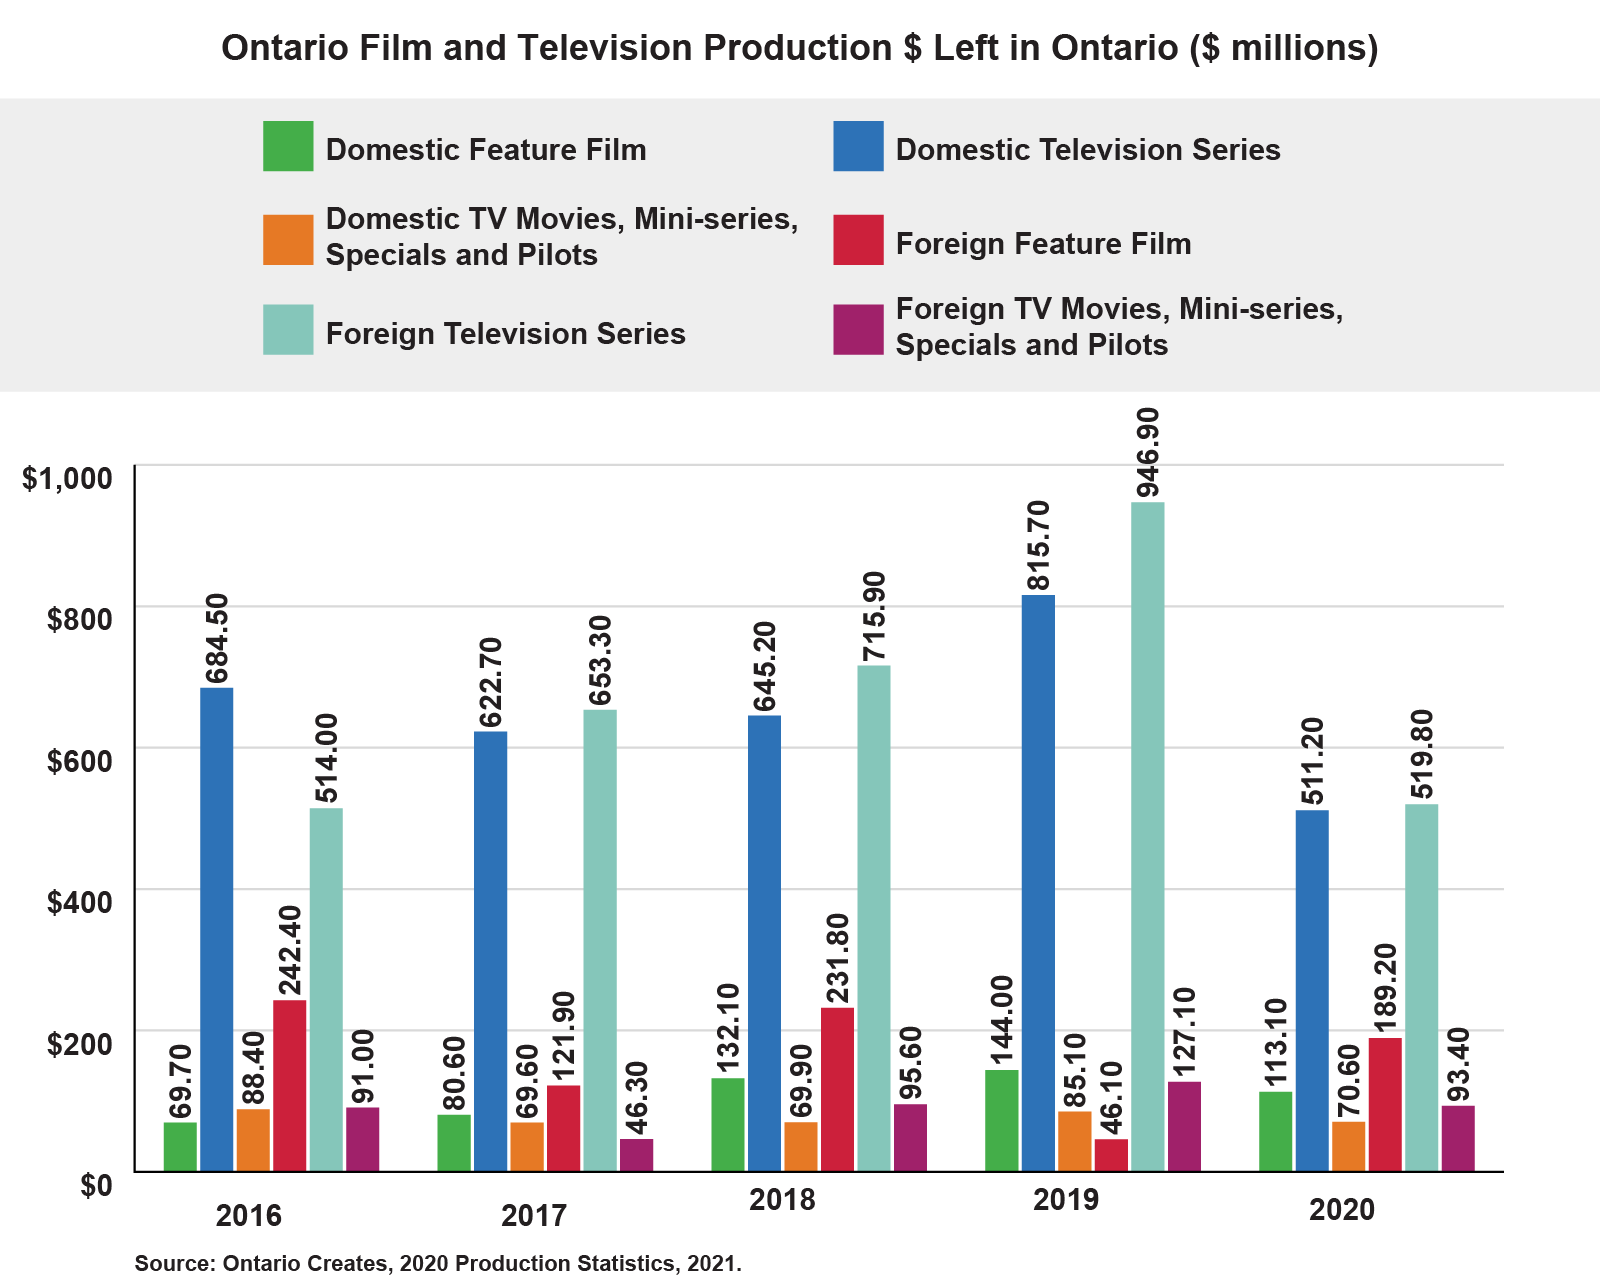 A column chart showing statistics for the years 2016-2020 on production dollars left in Ontario by both domestic and foreign feature films, televisions series, and TV movies, mini-series, specials and pilots. All sectors dropped between 2019 and 2020, with the exception of foreign feature films, which increased significantly. Foreign TV movies, mini-series, specials and pilots were below 2019 levels, but were roughly on par with previous years.